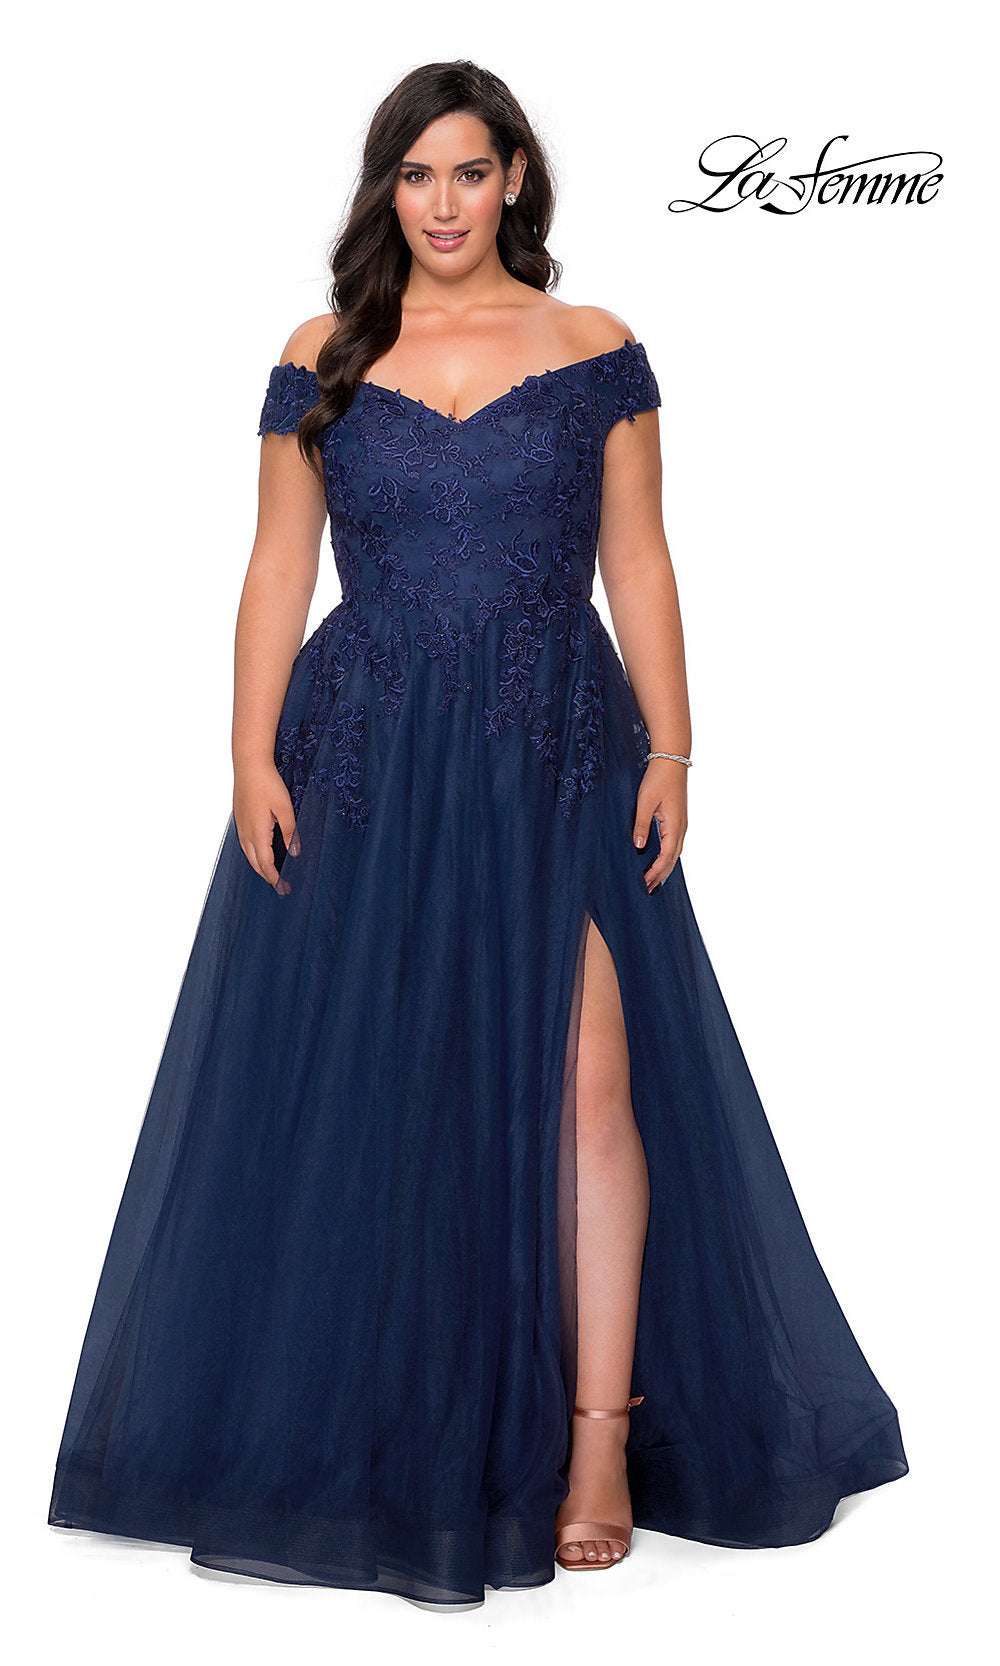 Embroidered Femme Plus-Size Prom Ball Gown